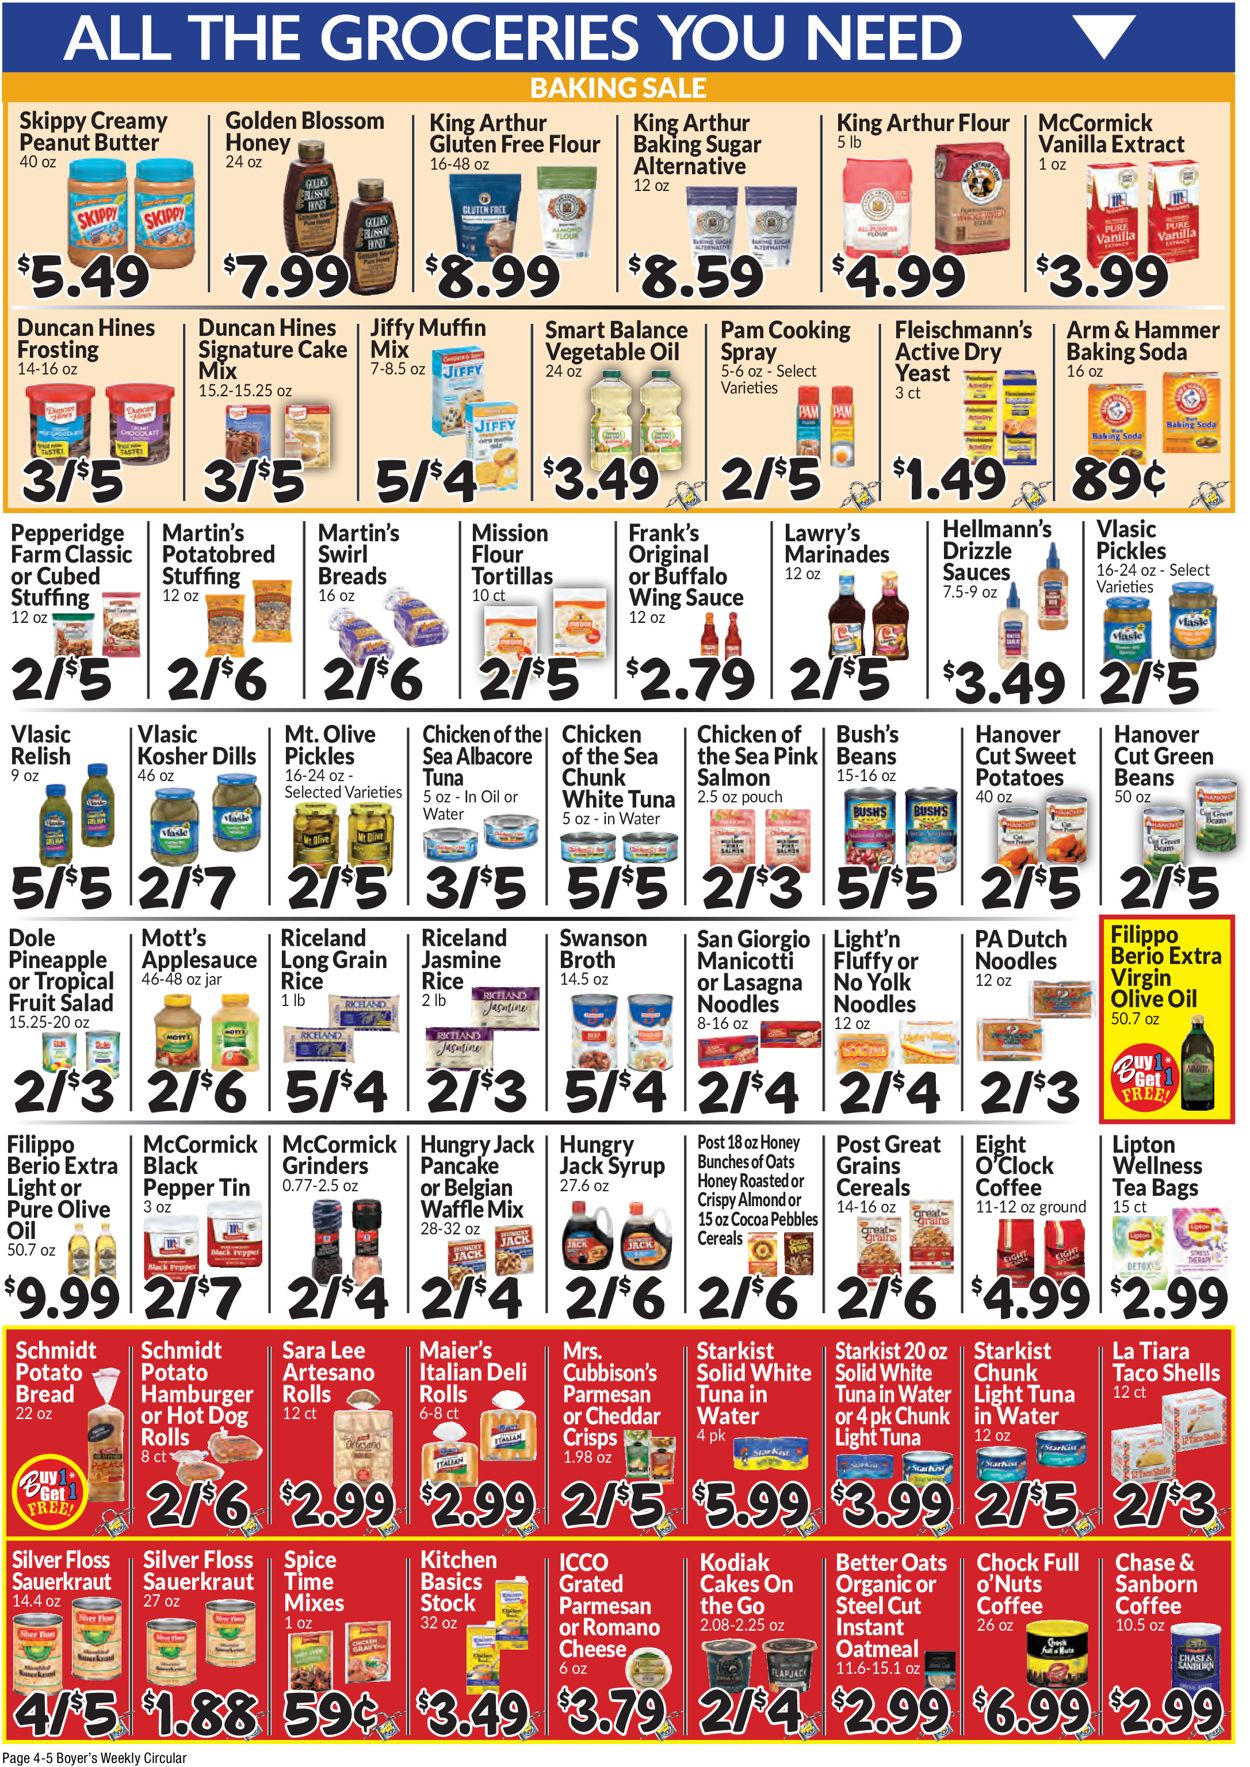 Boyer's Food Markets THANKSGIVING 2021 Weekly Ad Circular - valid 11/21-11/27/2021 (Page 6)